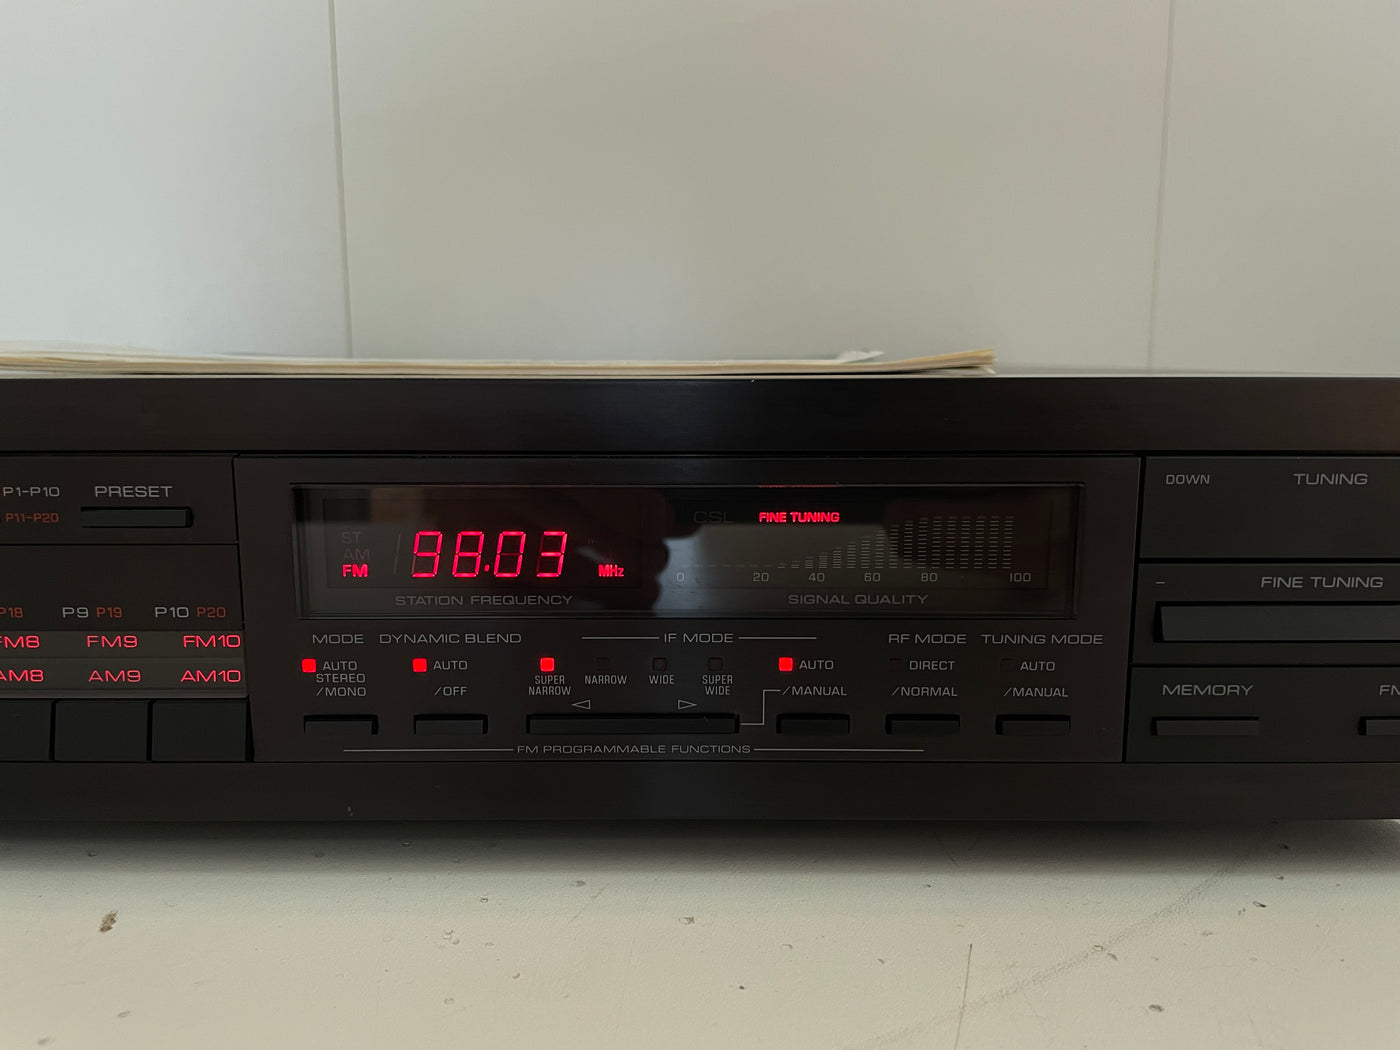 Yamaha T-85 Natural Sound AM/FM Stereo Tuner (1986-88)